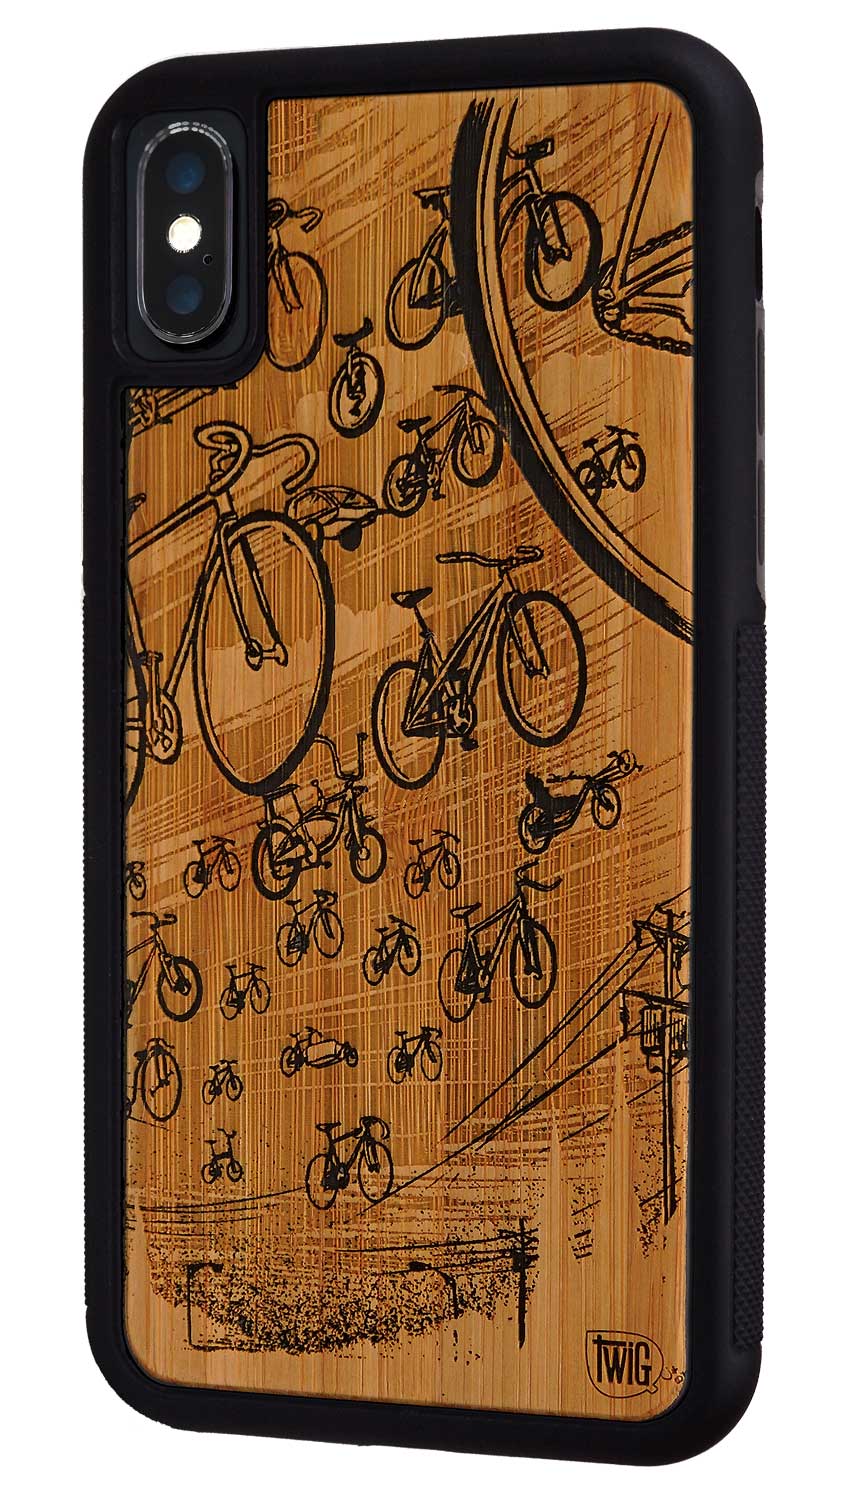 30 Bikes - Bamboo iPhone Case, iPhone Case - Twig Case Co.